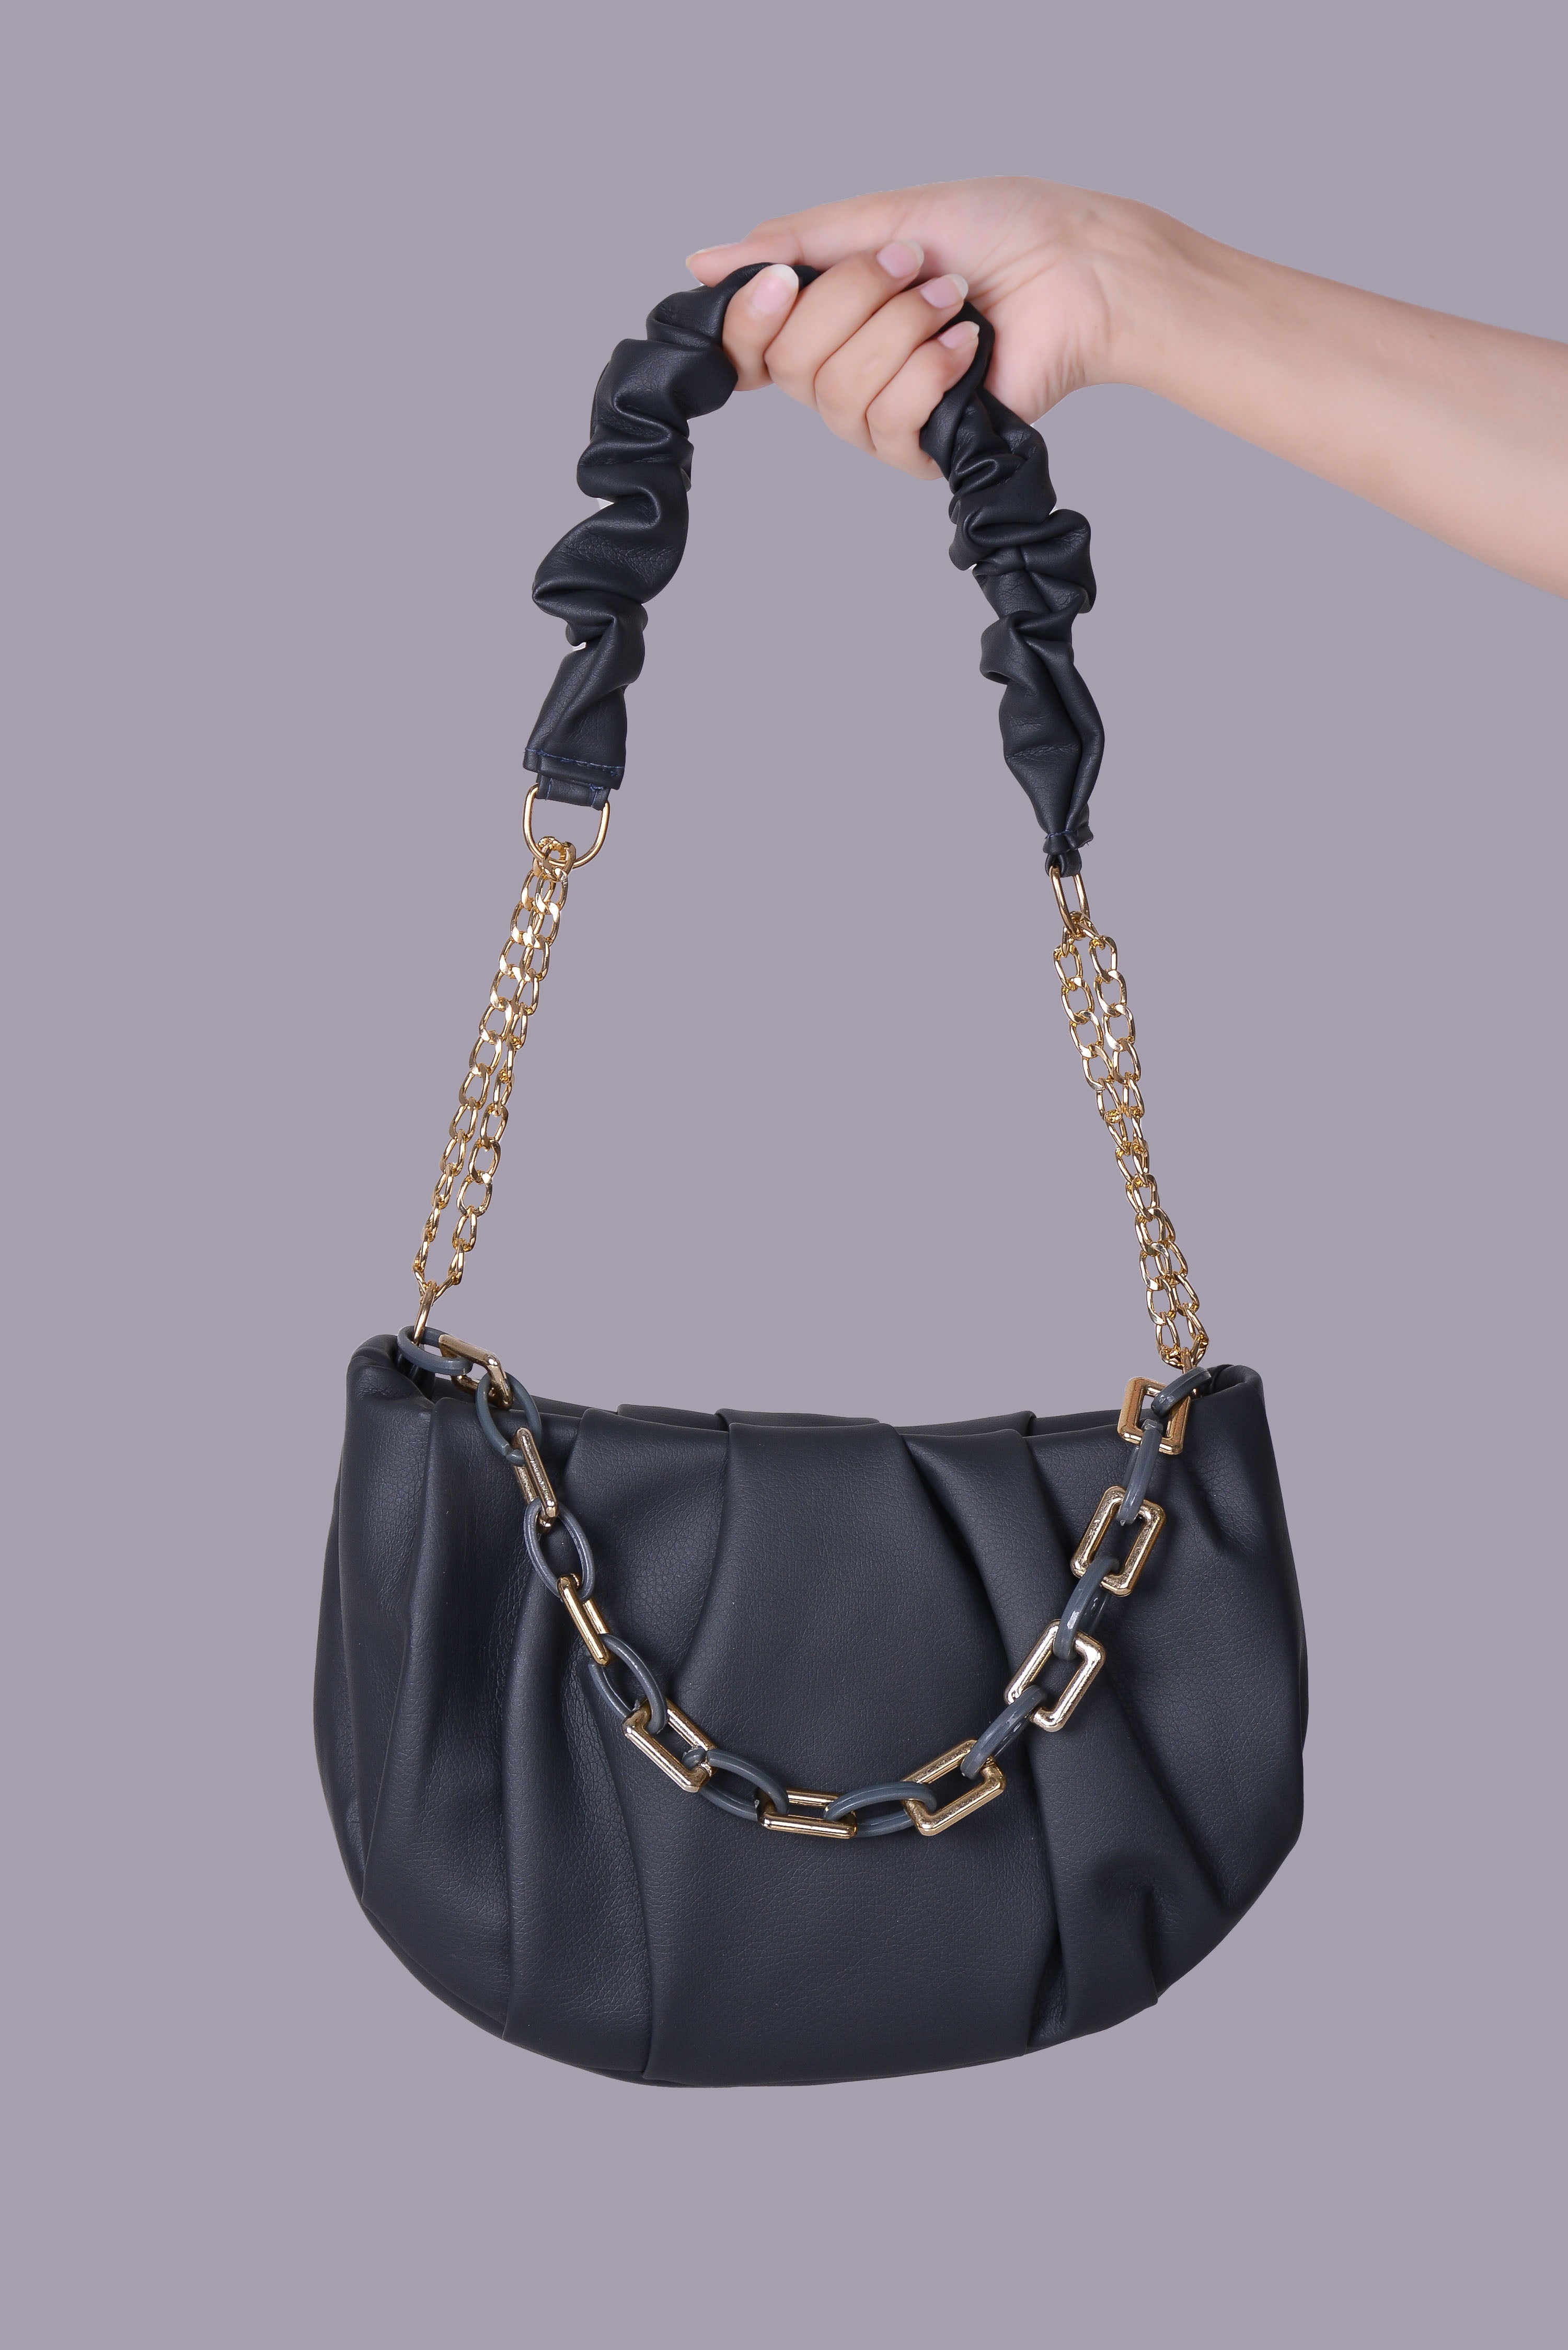 Hand Bags for Women |Ladies Purse S8-1349-F